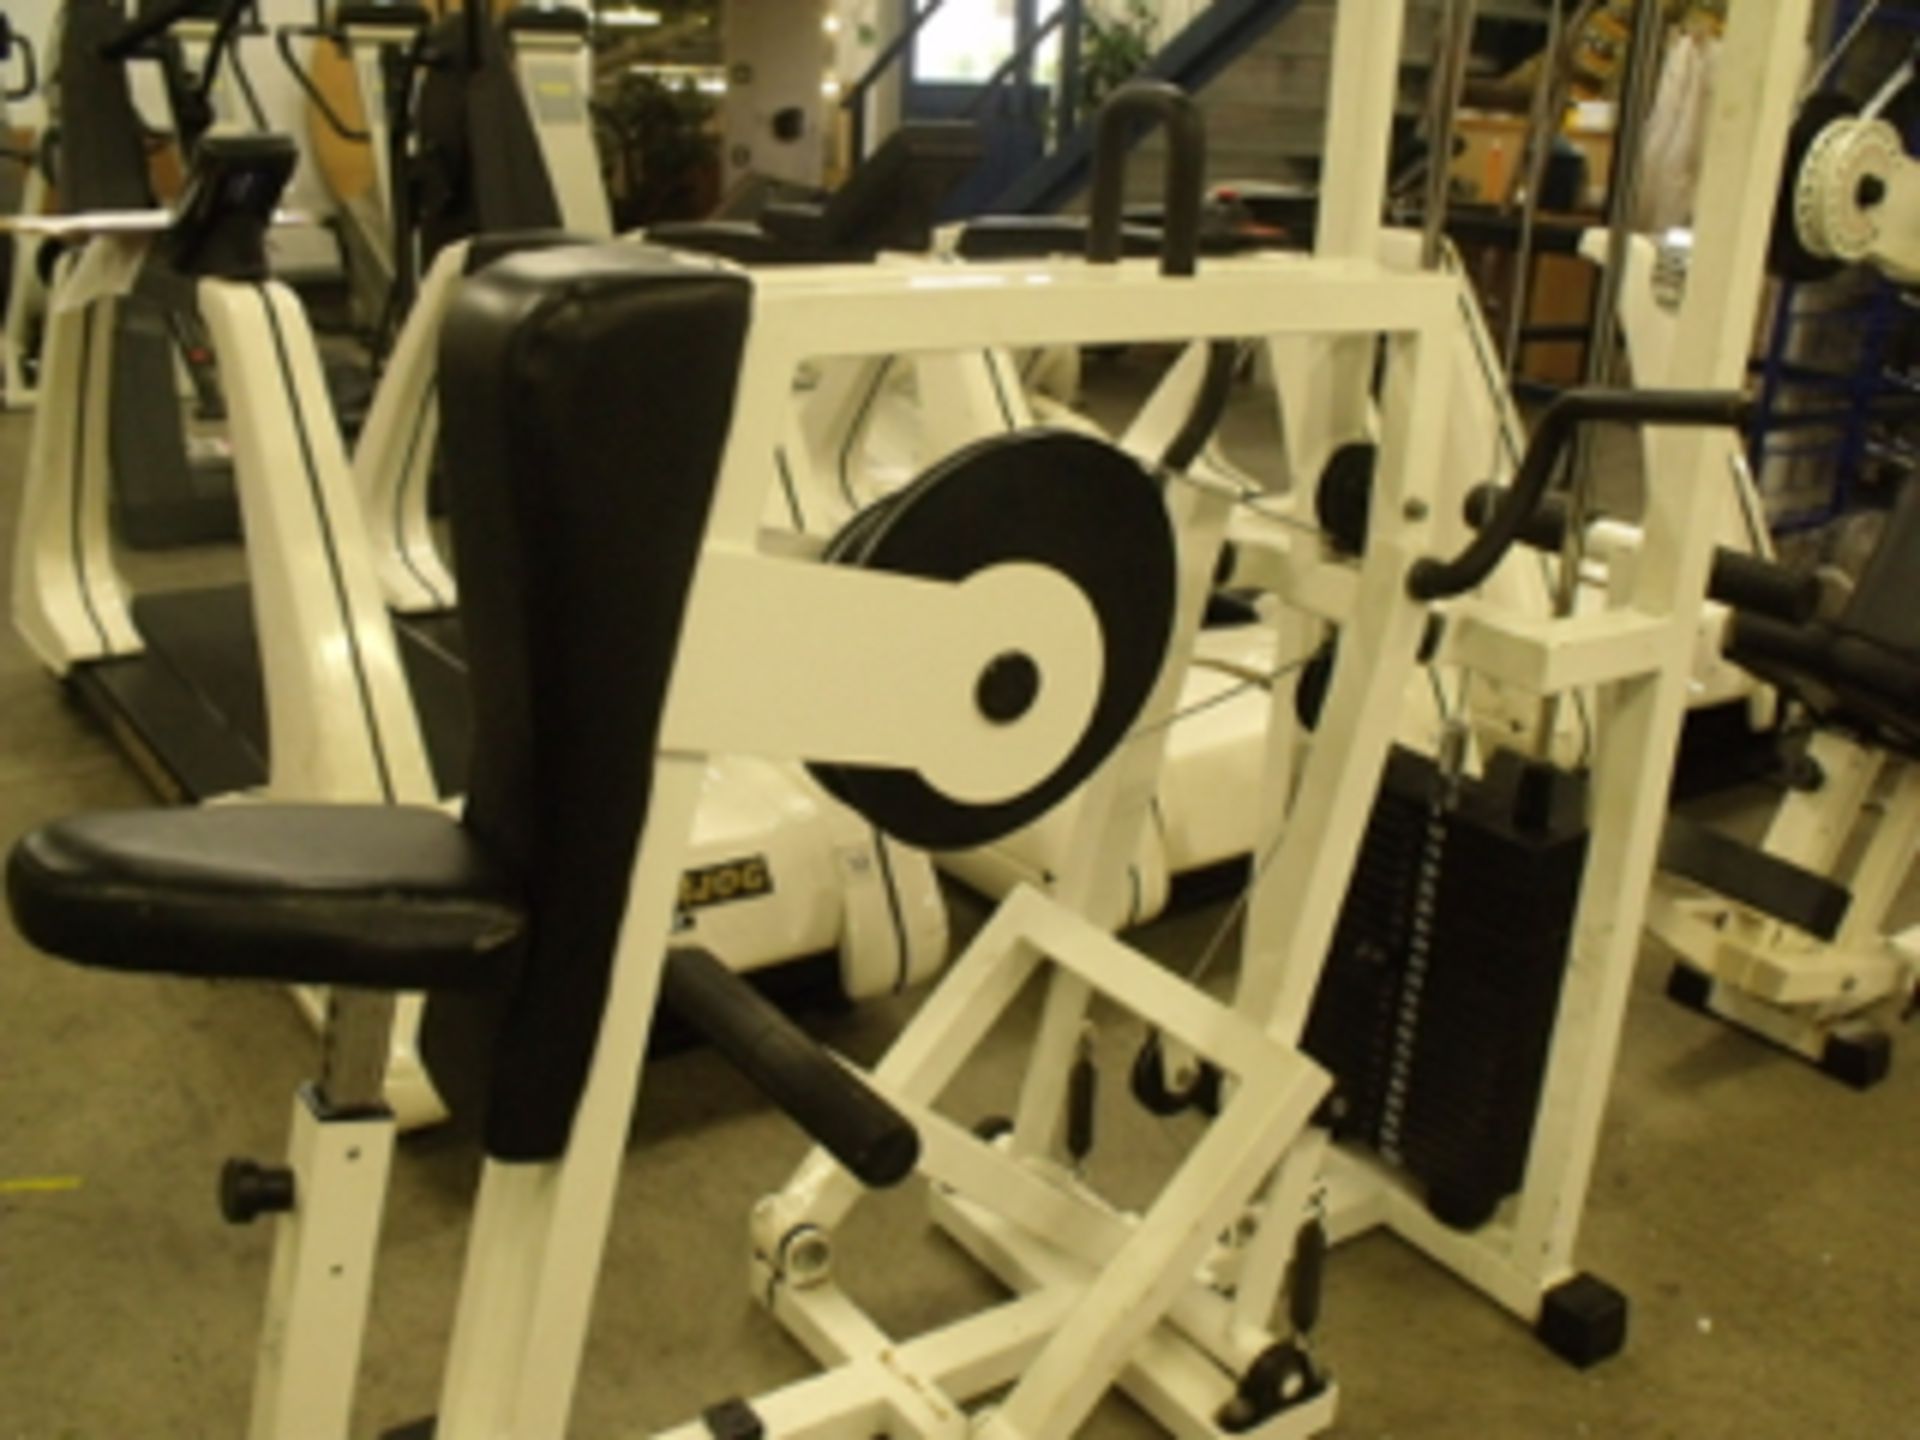 techno gym vertical row machine with 100kg weight set - Image 3 of 3